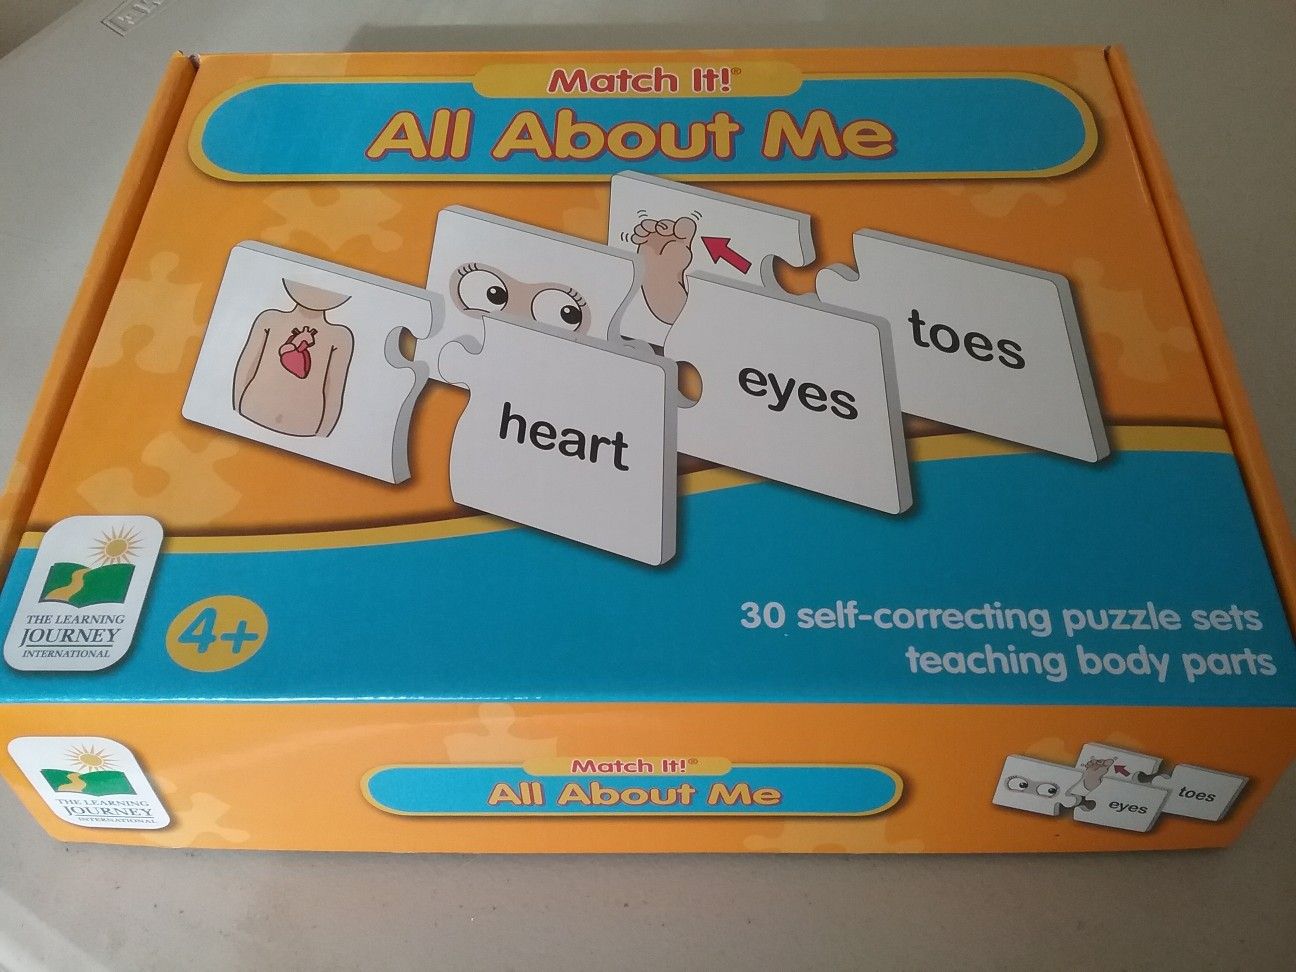 All About Me learning puzzle